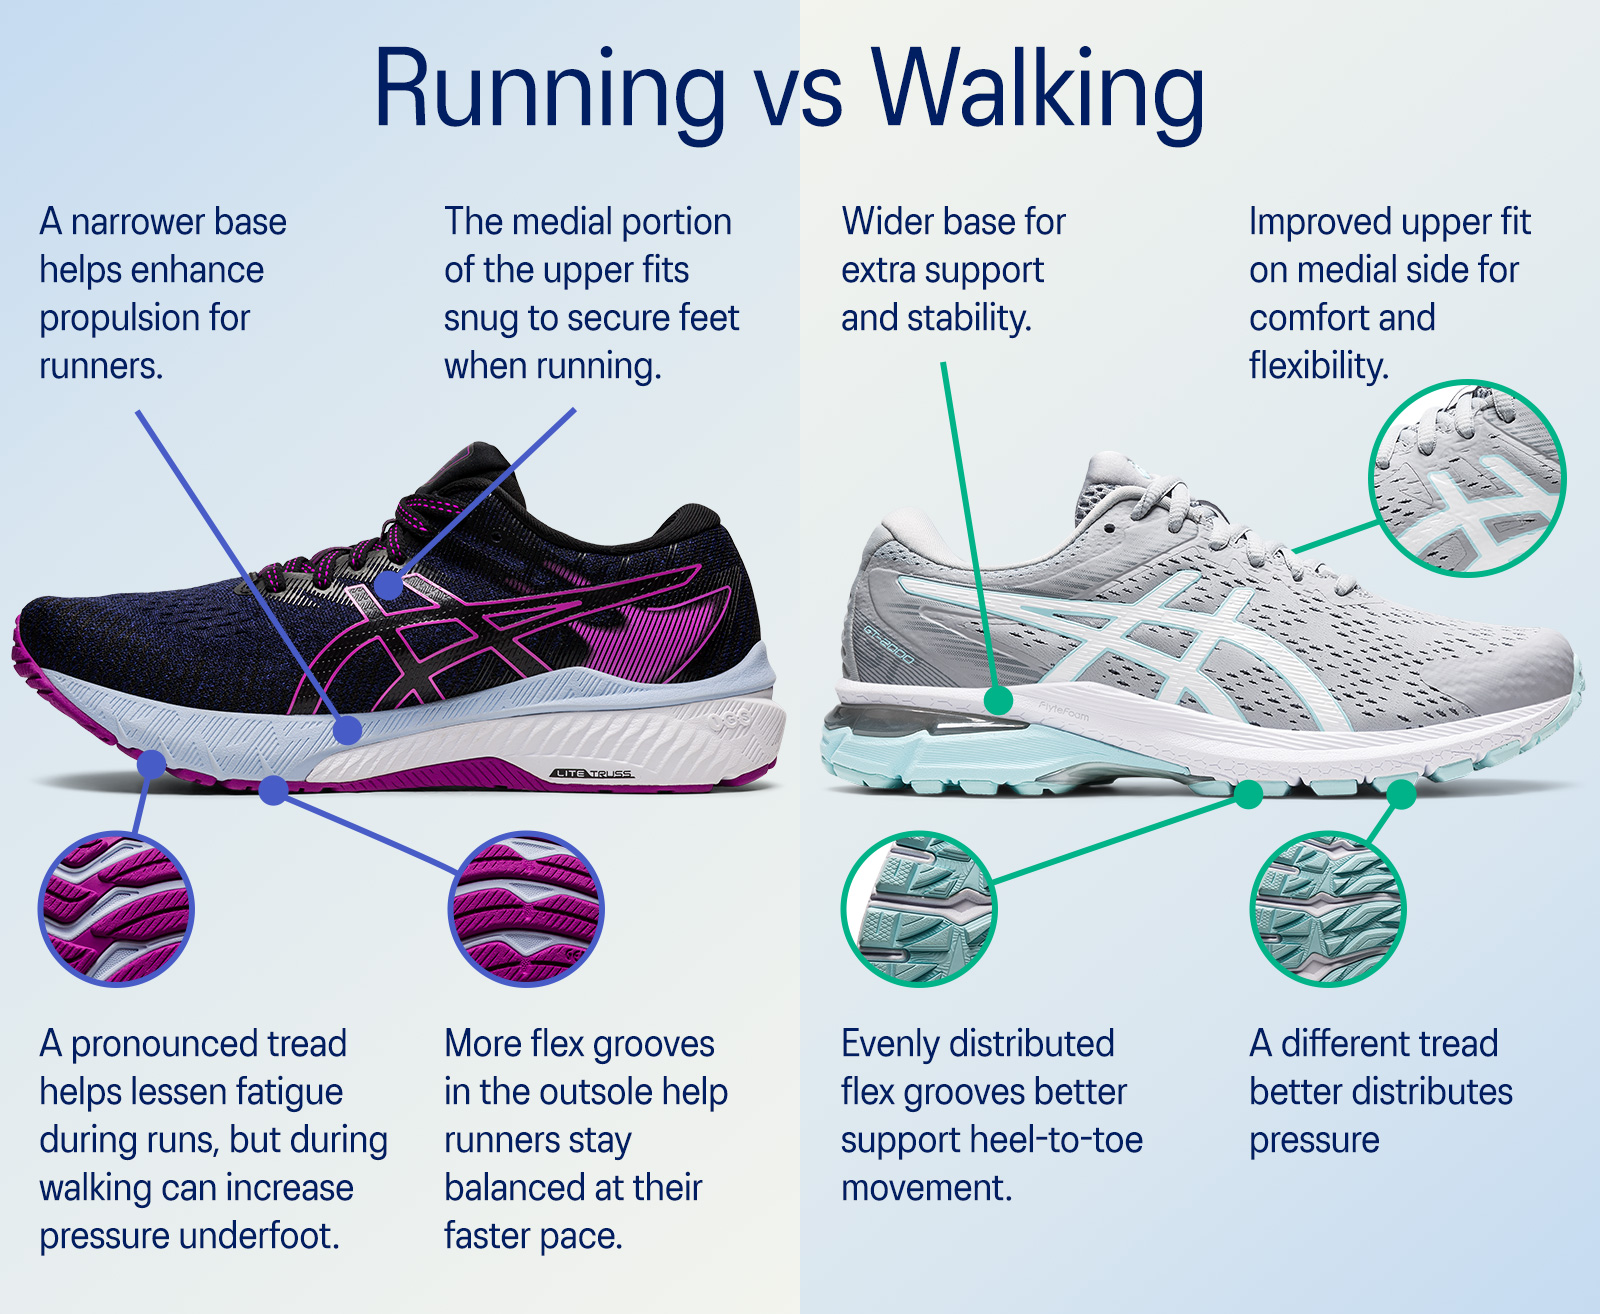 What Asics Shoe Has the Most Padding in the Heel?